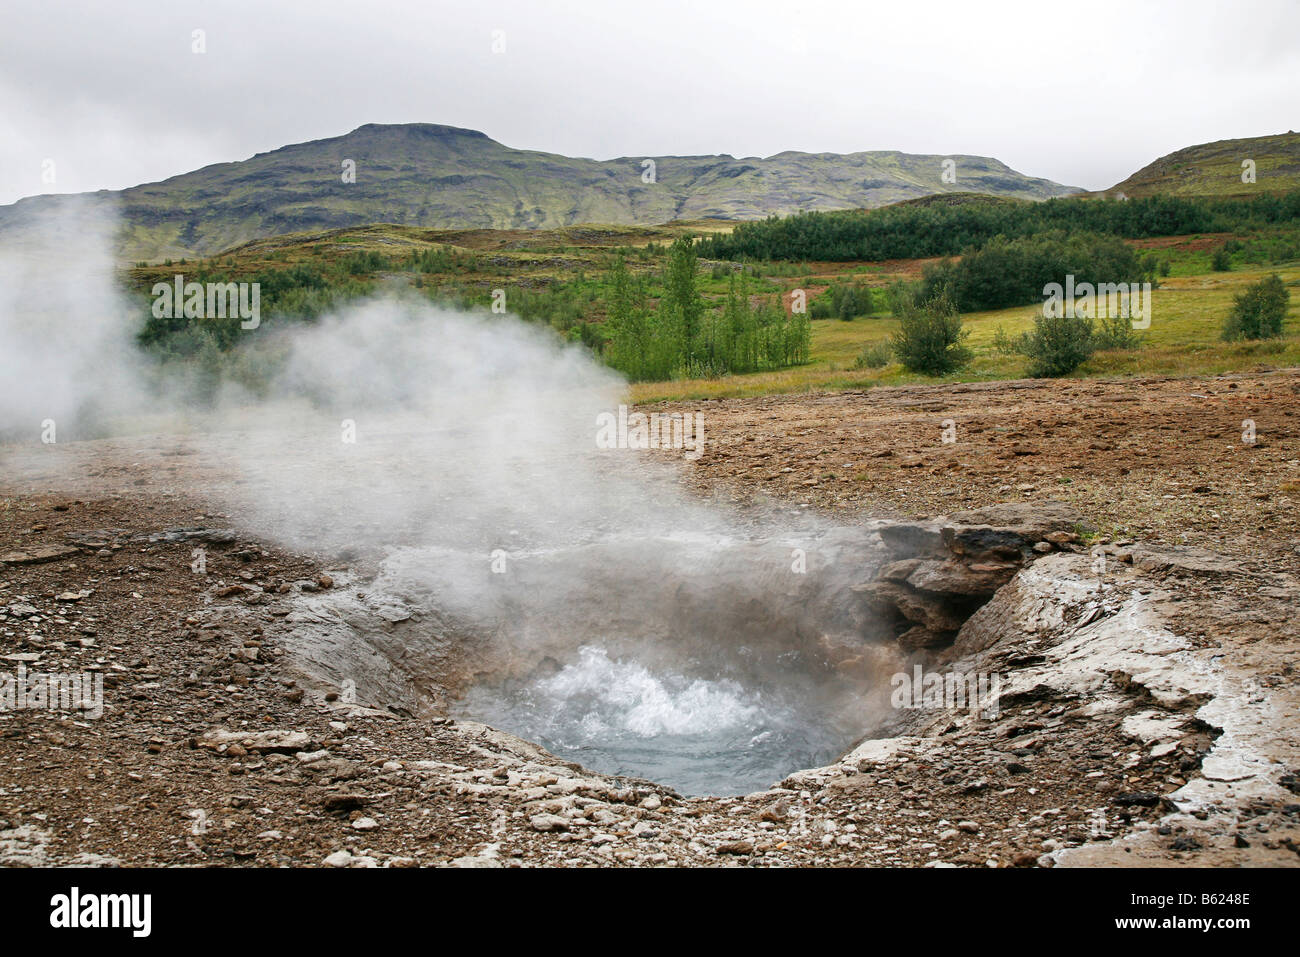 Hot, boiling and steaming spring, geothermal region of Haukadalur, Geysir, Iceland, Europe Stock Photo